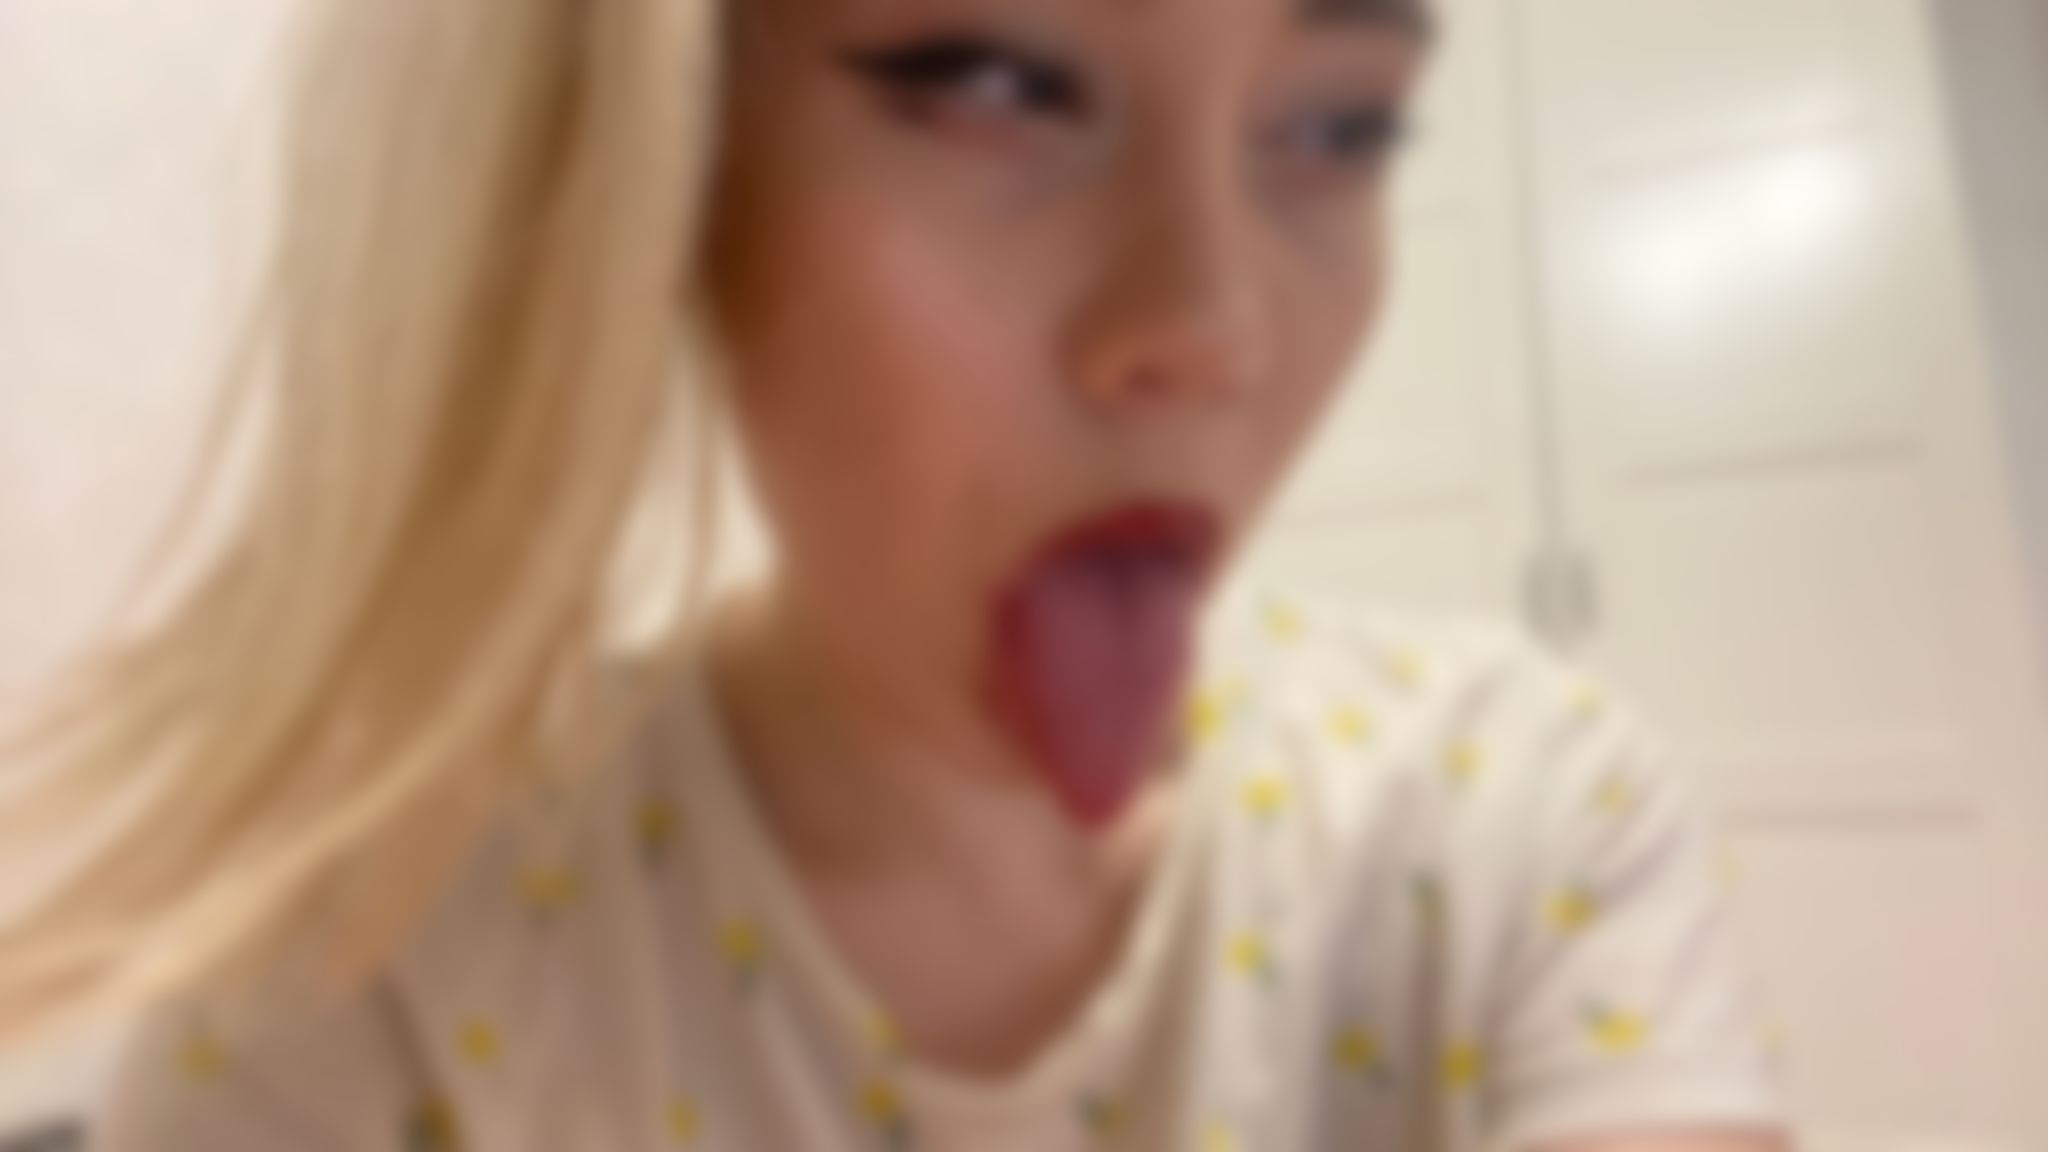 maryjanee : Play with my pussy and my ass, im horny as fuck.